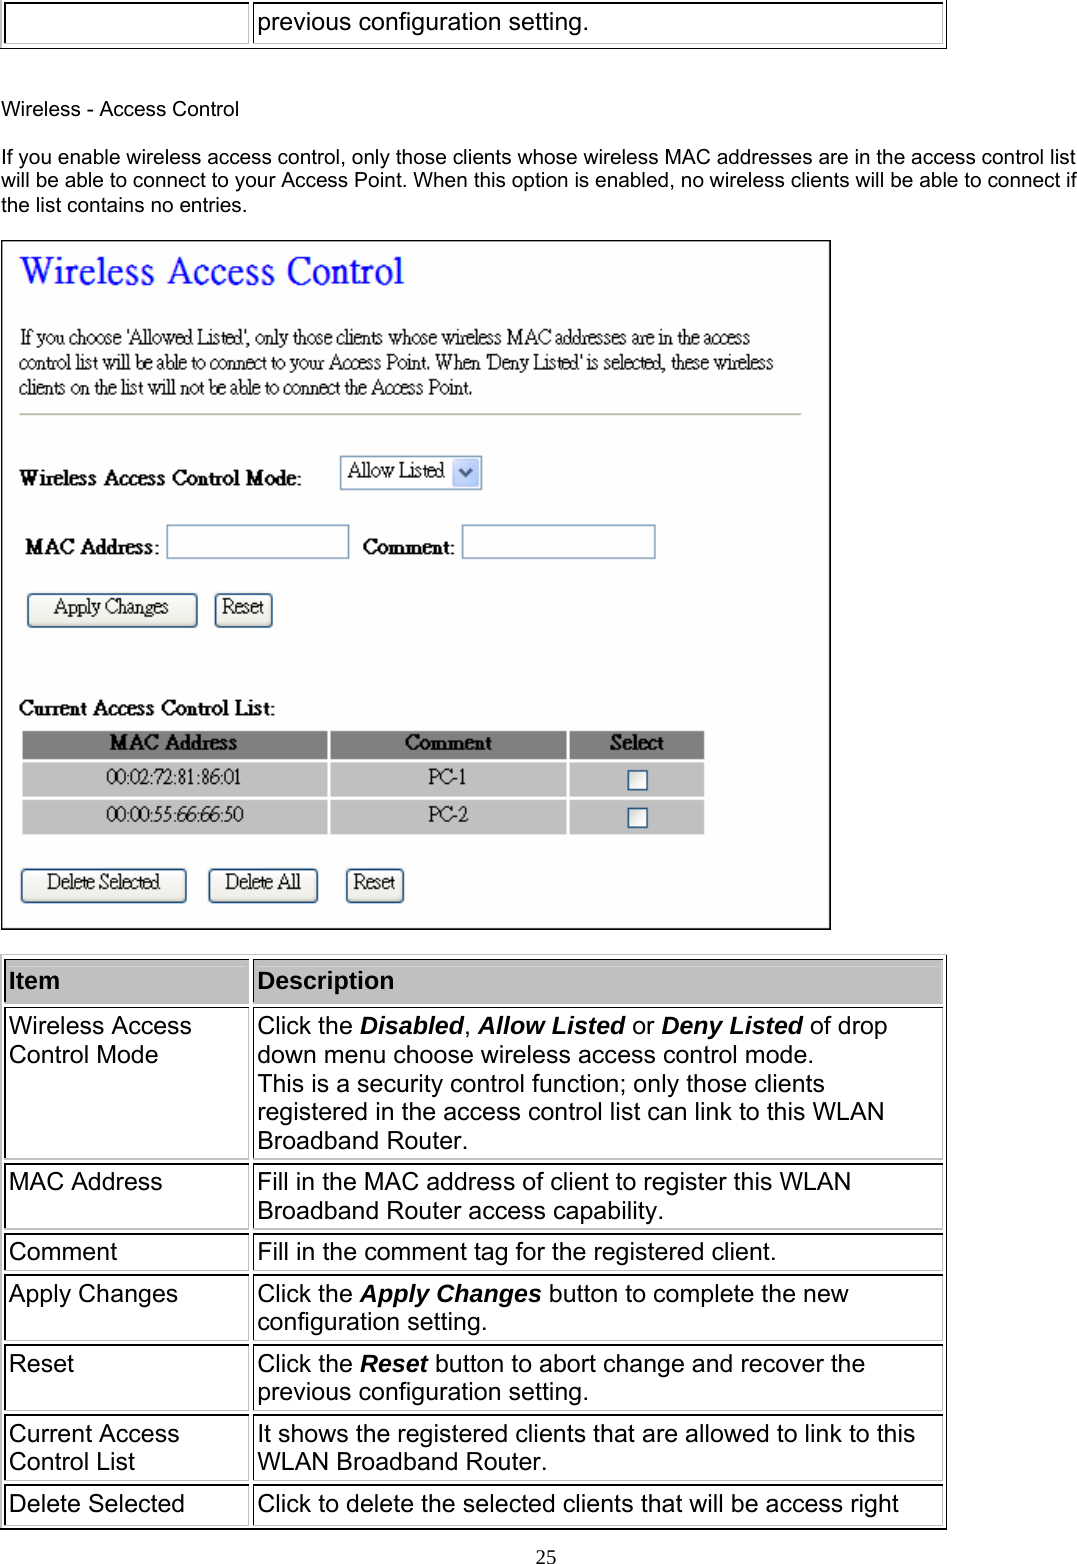 previous configuration setting.   Wireless - Access Control  If you enable wireless access control, only those clients whose wireless MAC addresses are in the access control list will be able to connect to your Access Point. When this option is enabled, no wireless clients will be able to connect if the list contains no entries.    Item  Description Wireless Access Control Mode Click the Disabled, Allow Listed or Deny Listed of drop down menu choose wireless access control mode.   This is a security control function; only those clients registered in the access control list can link to this WLAN Broadband Router. MAC Address  Fill in the MAC address of client to register this WLAN Broadband Router access capability. Comment  Fill in the comment tag for the registered client. Apply Changes    Click the Apply Changes button to complete the new configuration setting. Reset   Click the Reset button to abort change and recover the previous configuration setting. Current Access Control List   It shows the registered clients that are allowed to link to this WLAN Broadband Router. Delete Selected  Click to delete the selected clients that will be access right     25